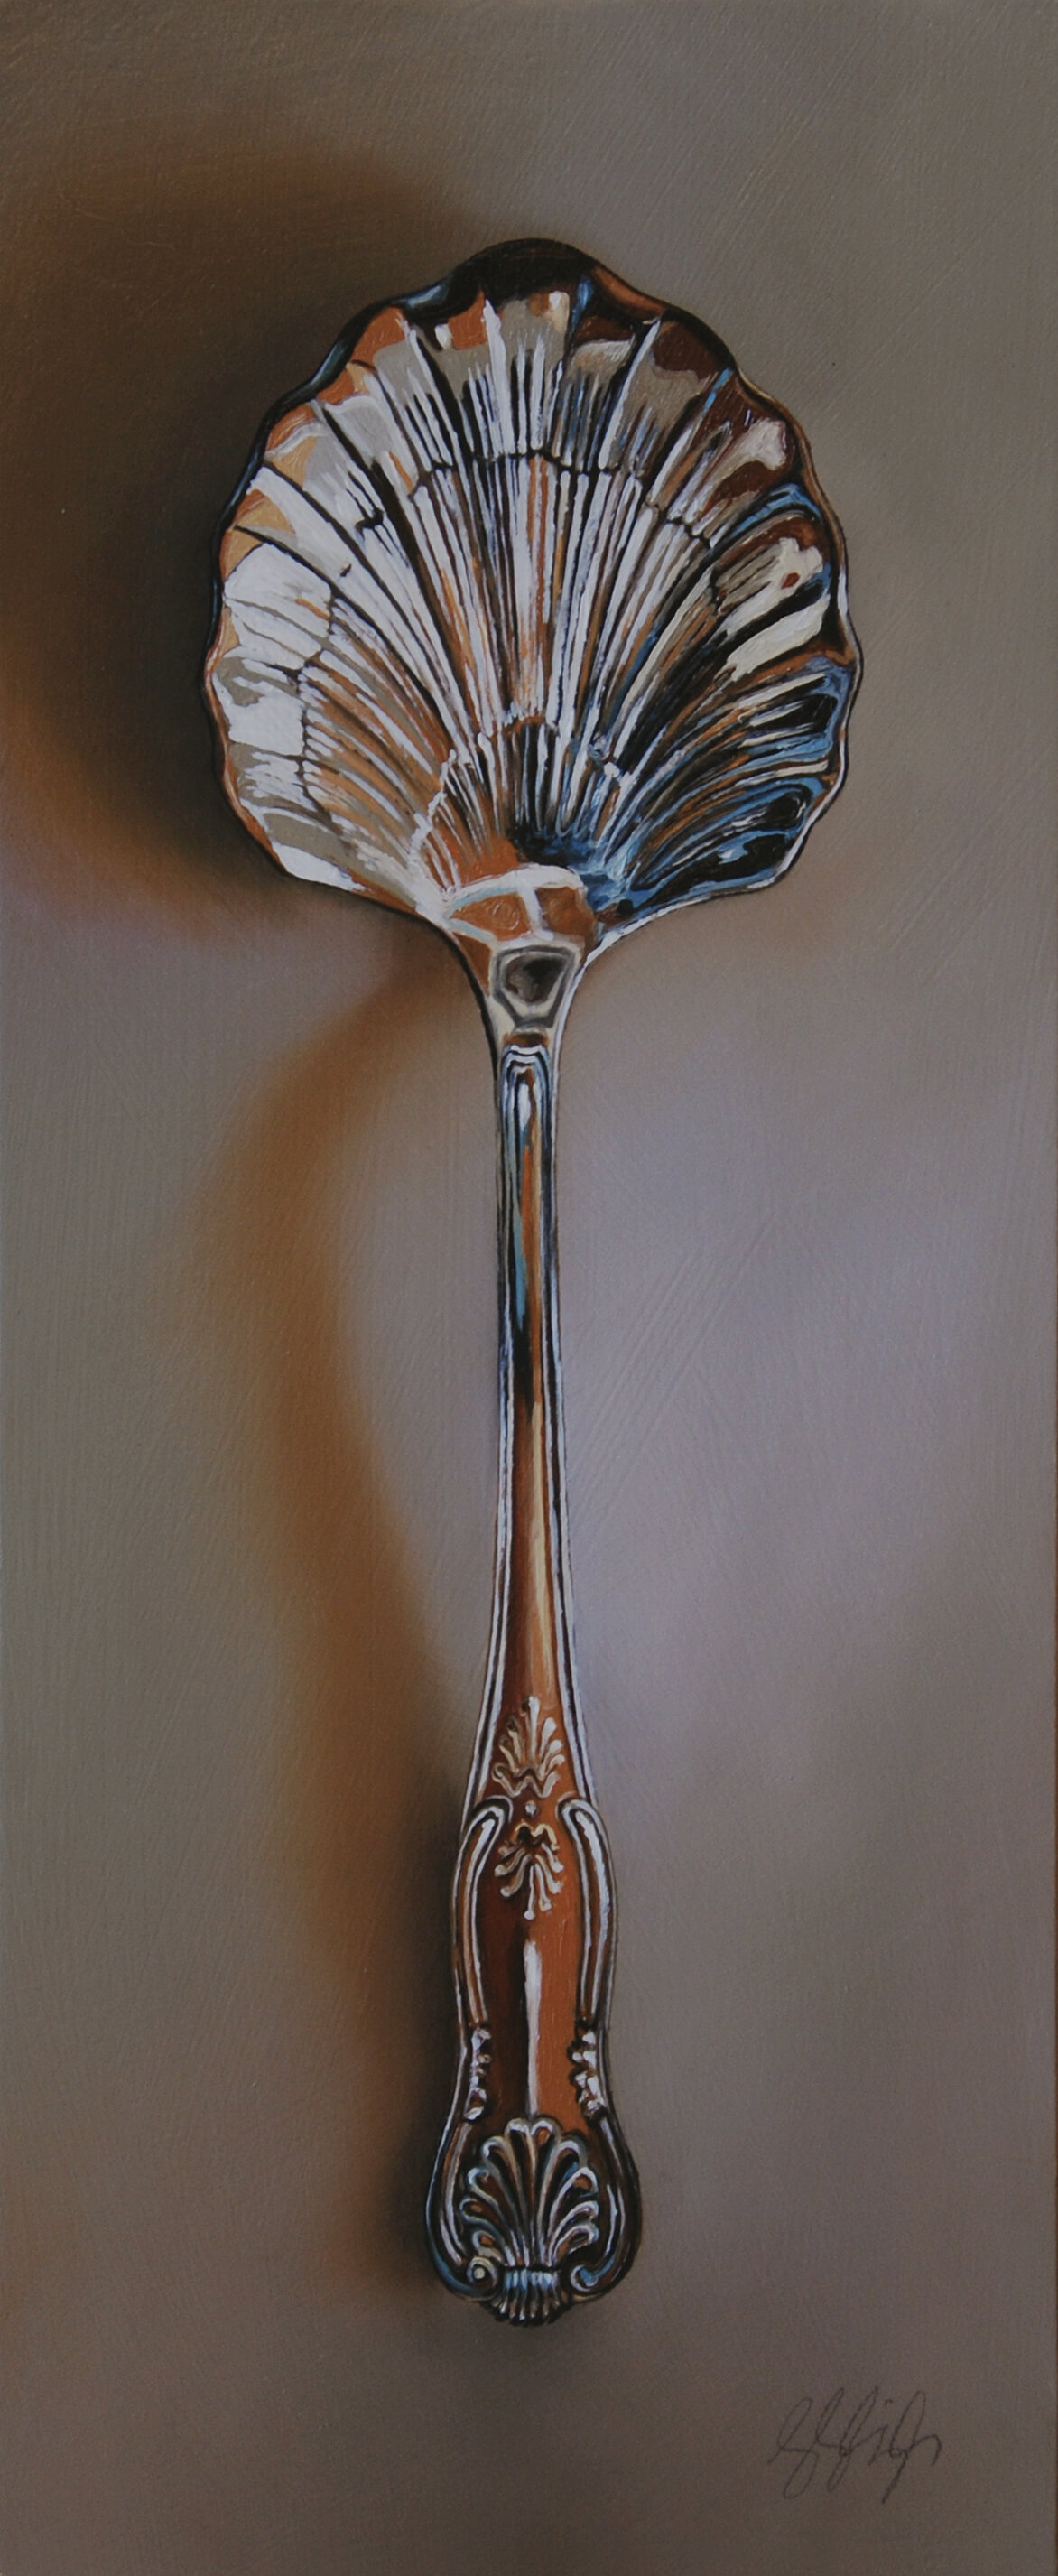   Silver Spoon #167, The Emissary  Oil on panel, 2020. 12x5” 